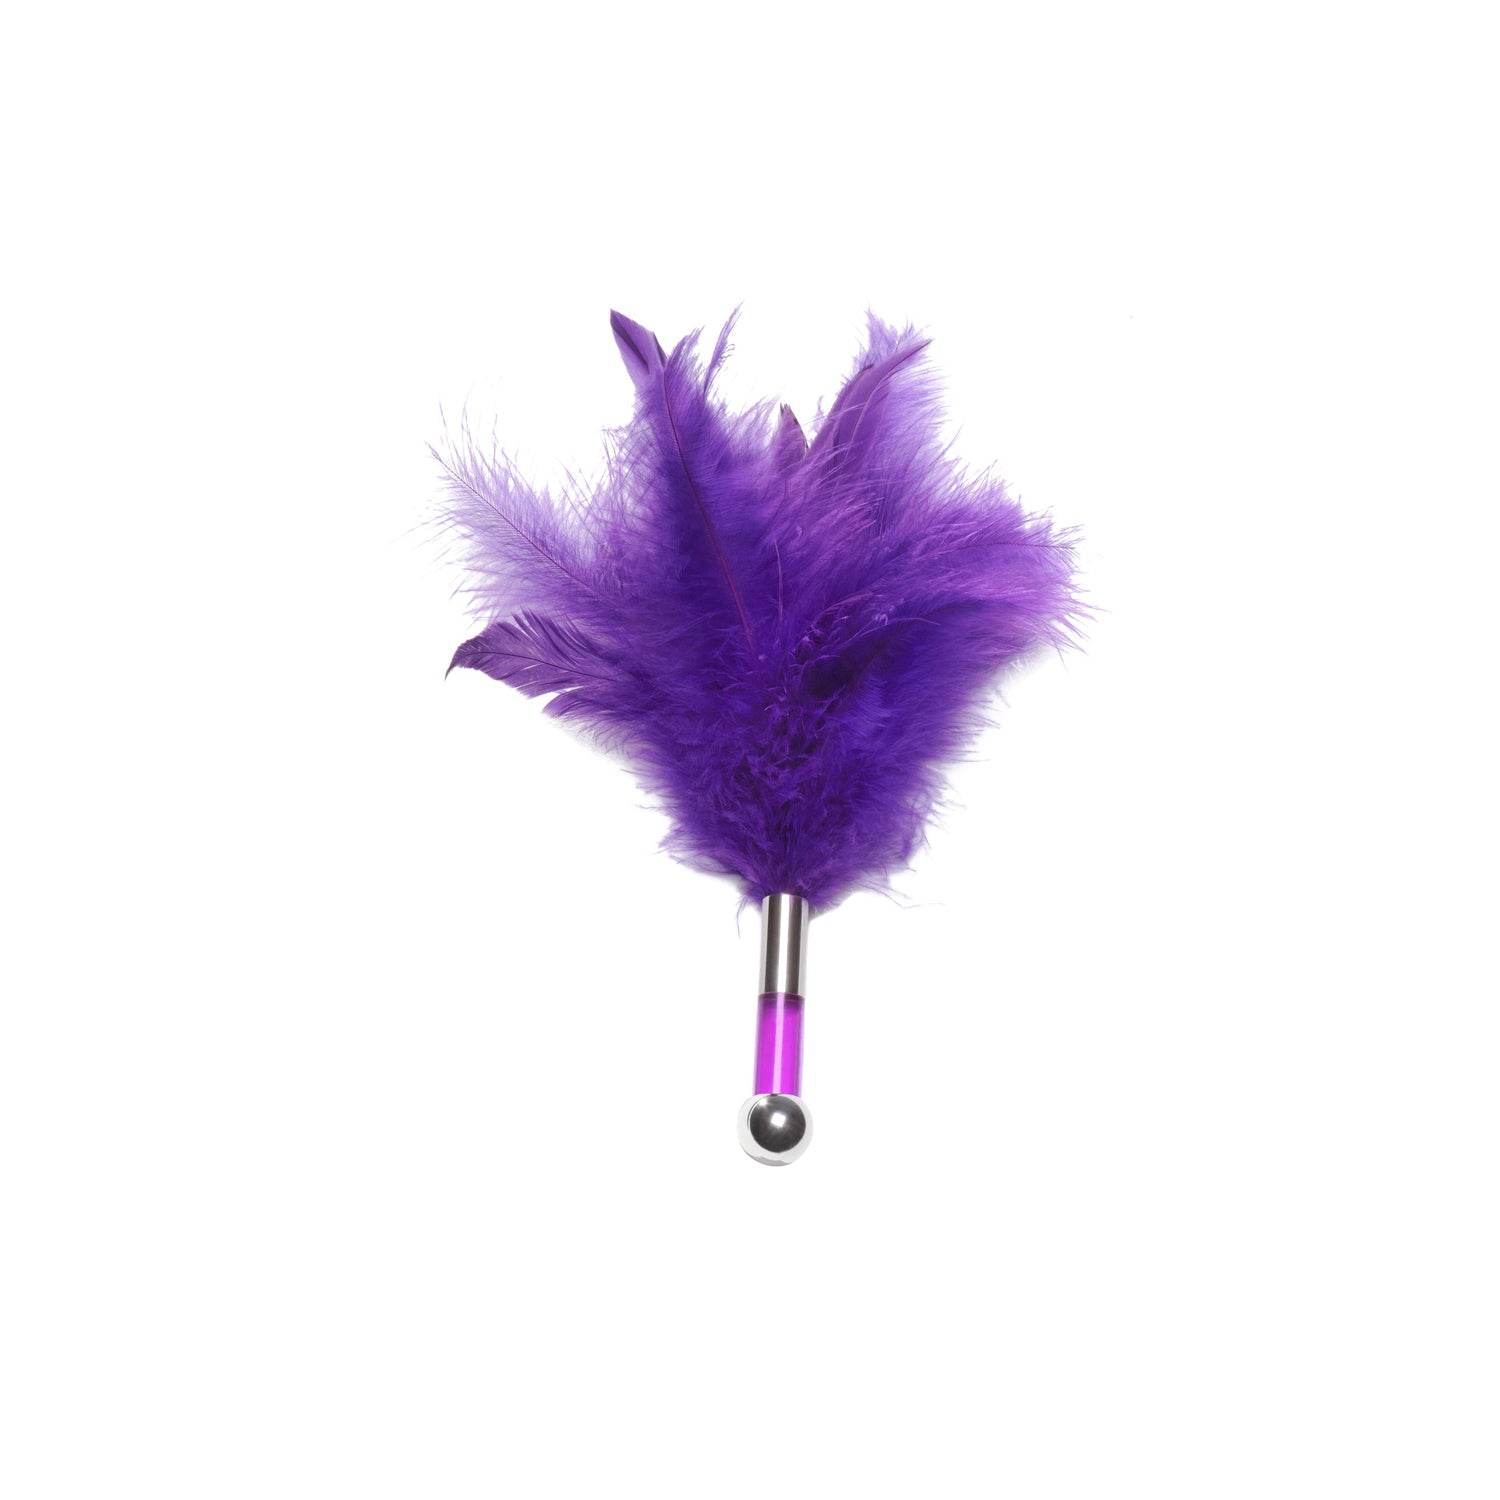 Tantra Feather | Juguete Sensorial Parejas by Lelo - Purple - Lelo - Tantra Feather | Juguete Sensorial Parejas by Lelo - LUST TOYS